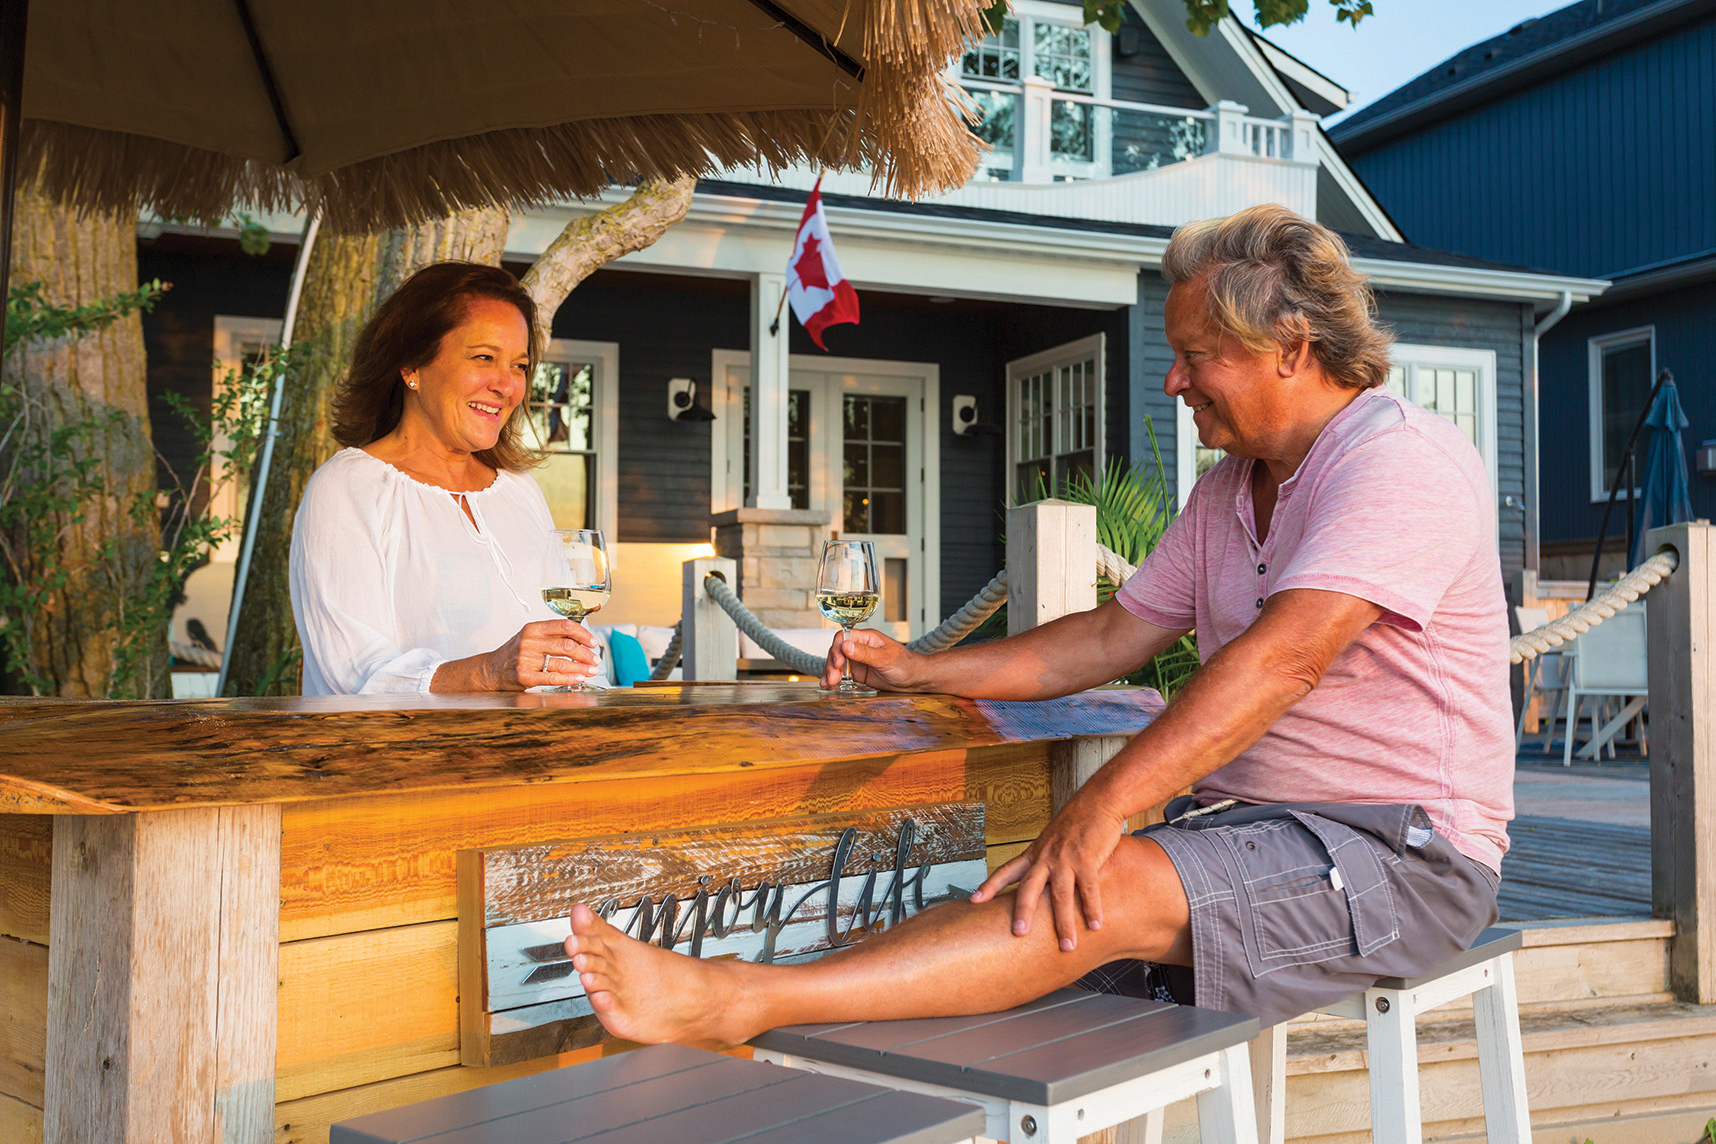 Homeowner Lisa Mantella and her partner, Marty Frampton, love to spend time in the multifunctional outdoor space, whether throwing a large party or enjoying a quiet evening for two watching the sunset over the water.